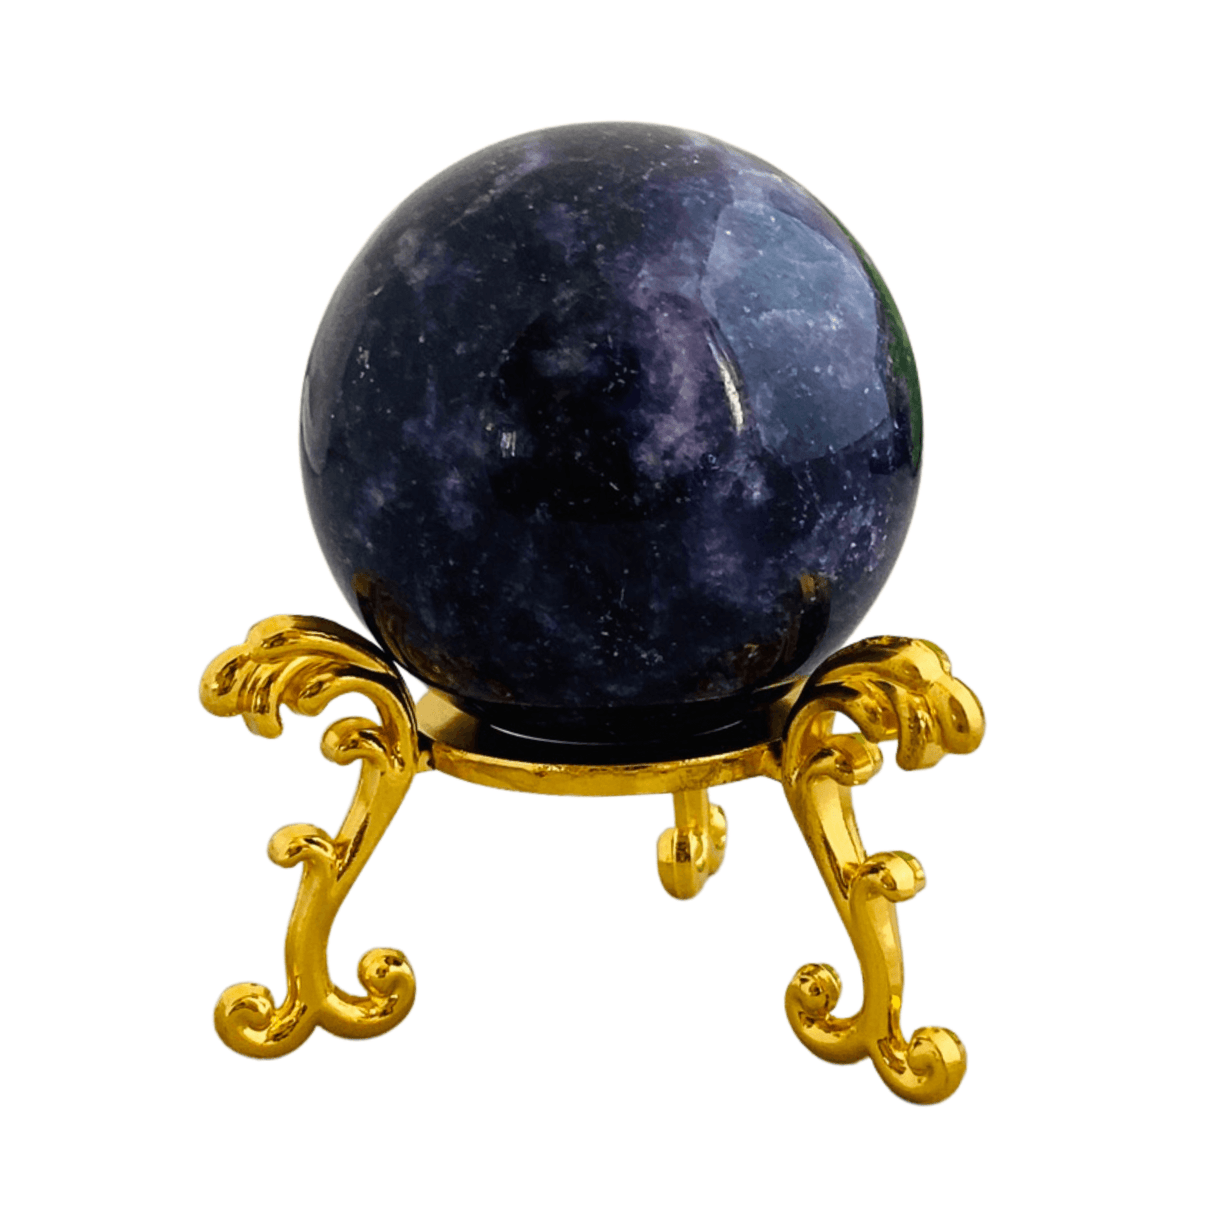 Sphere stand - Large three leg stand DSD-23 - Nature's Magick